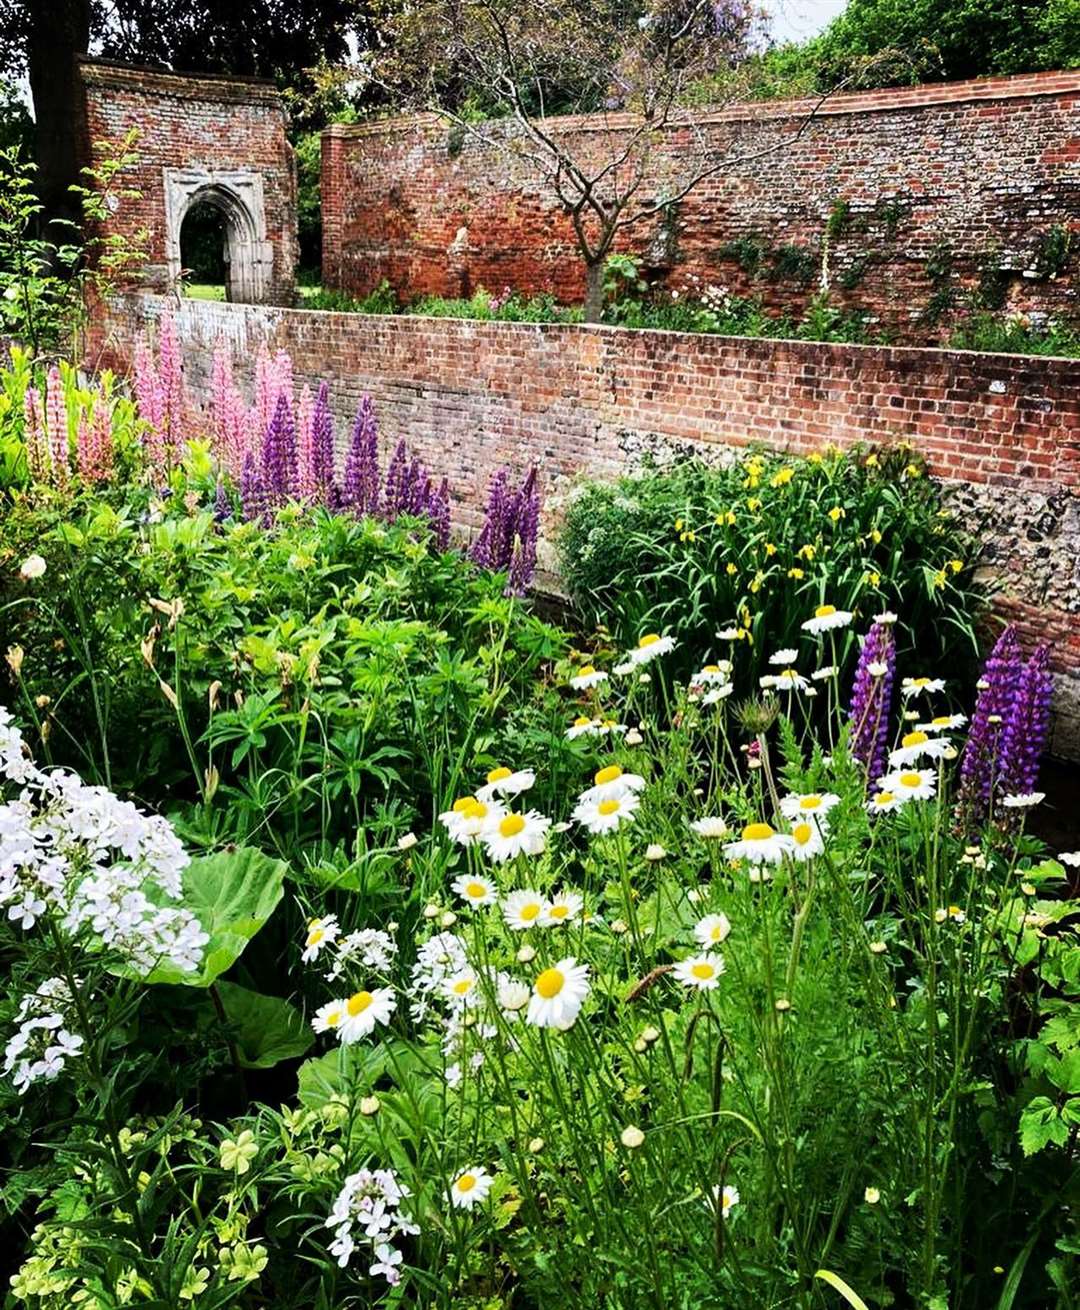 The Franciscan Gardens in Canterbury will hopefully open in 2025